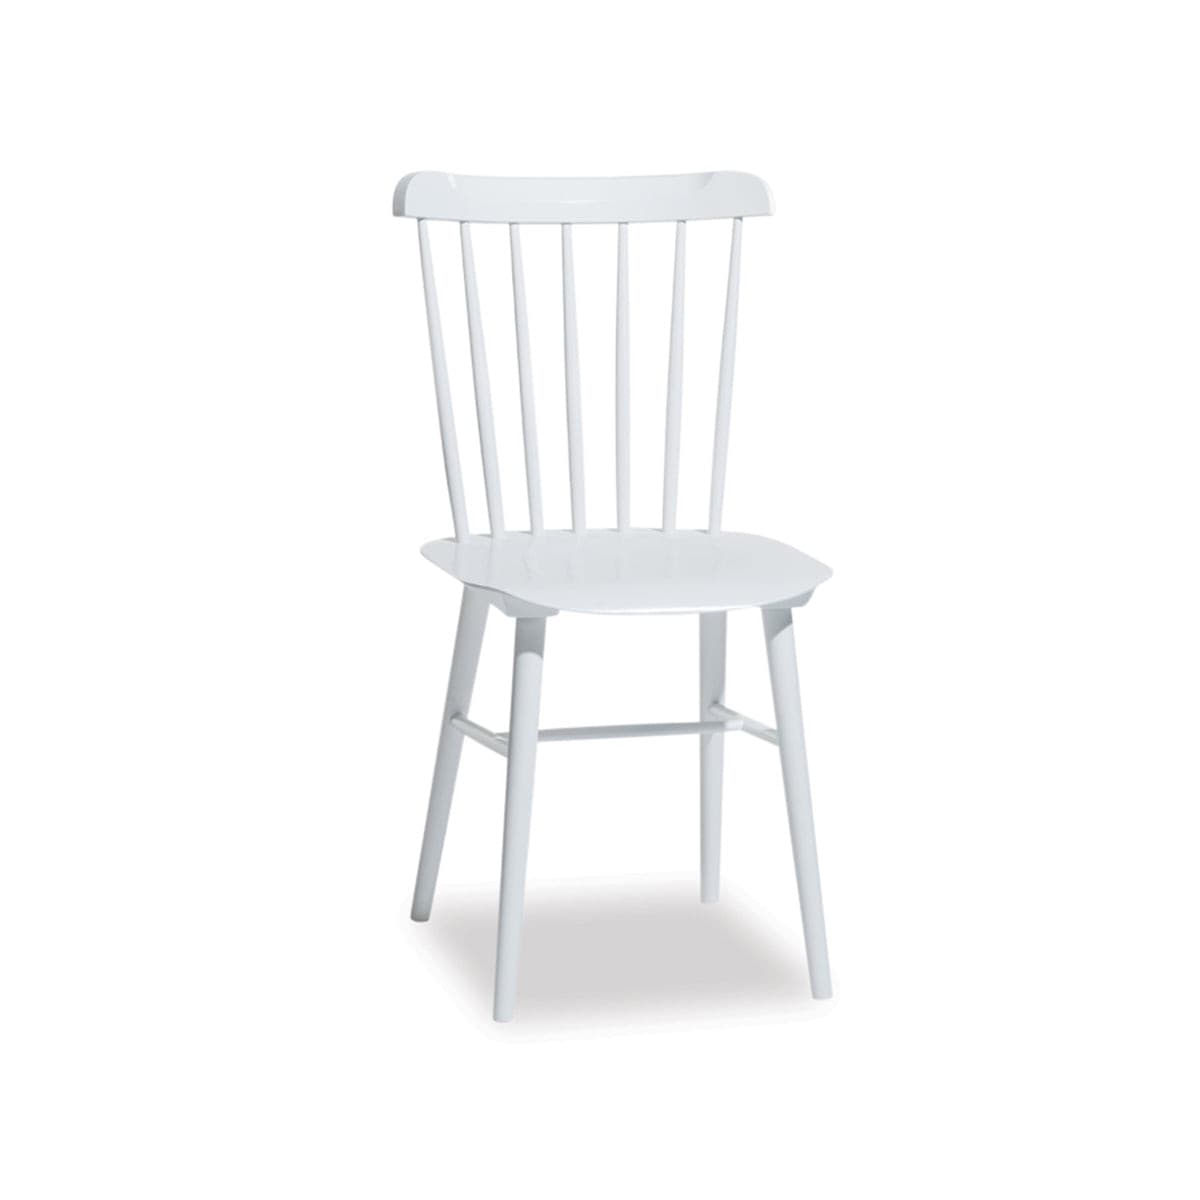 Ironica Dining Chair (White).